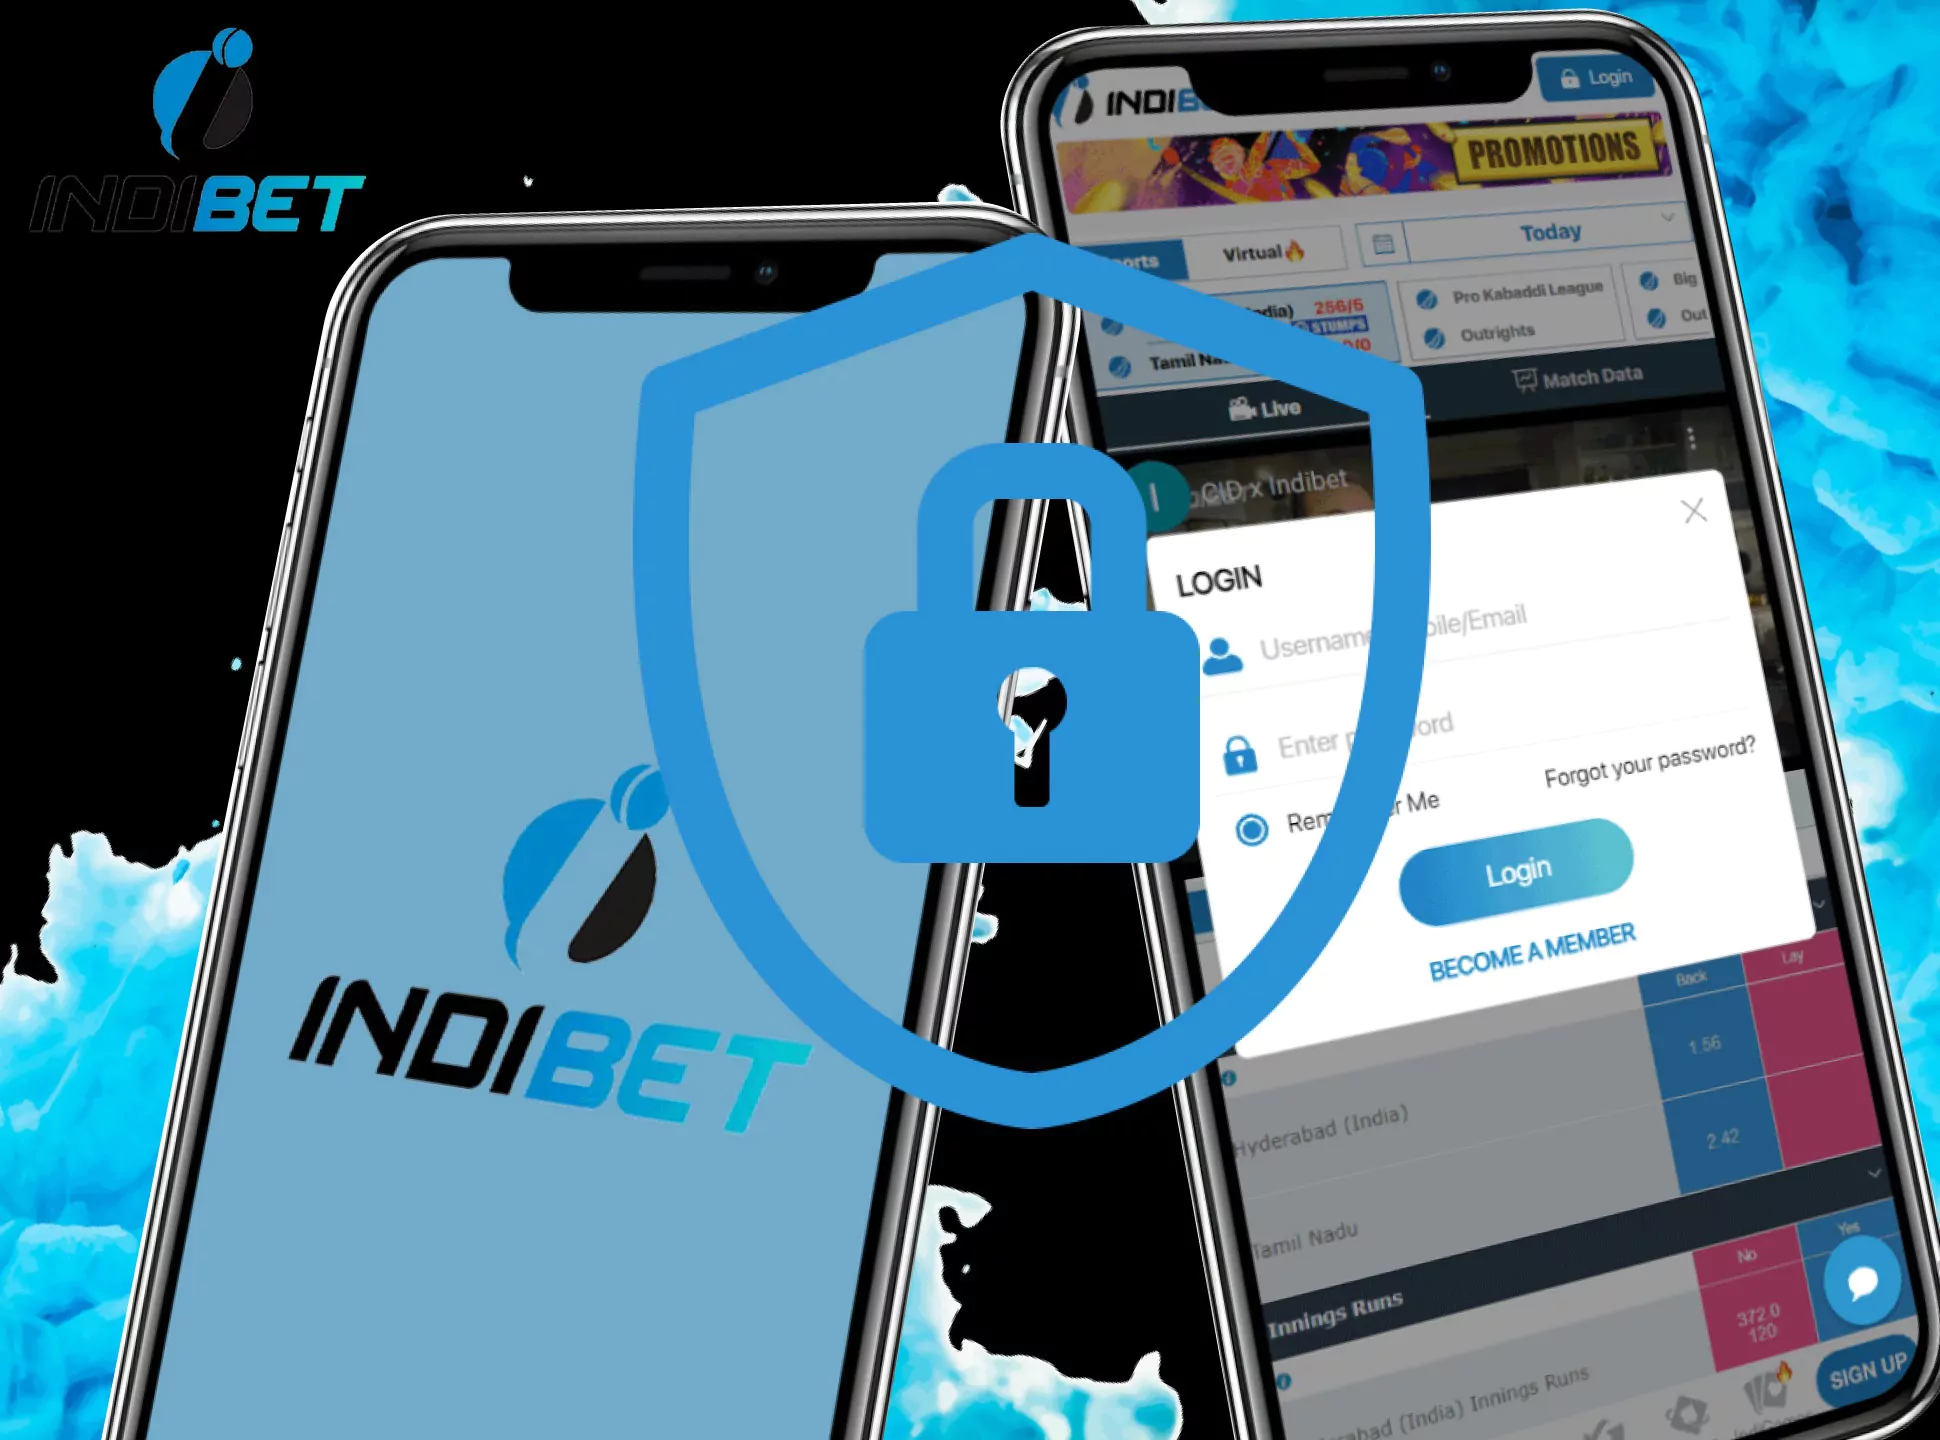 Your information in safe with Indibet.